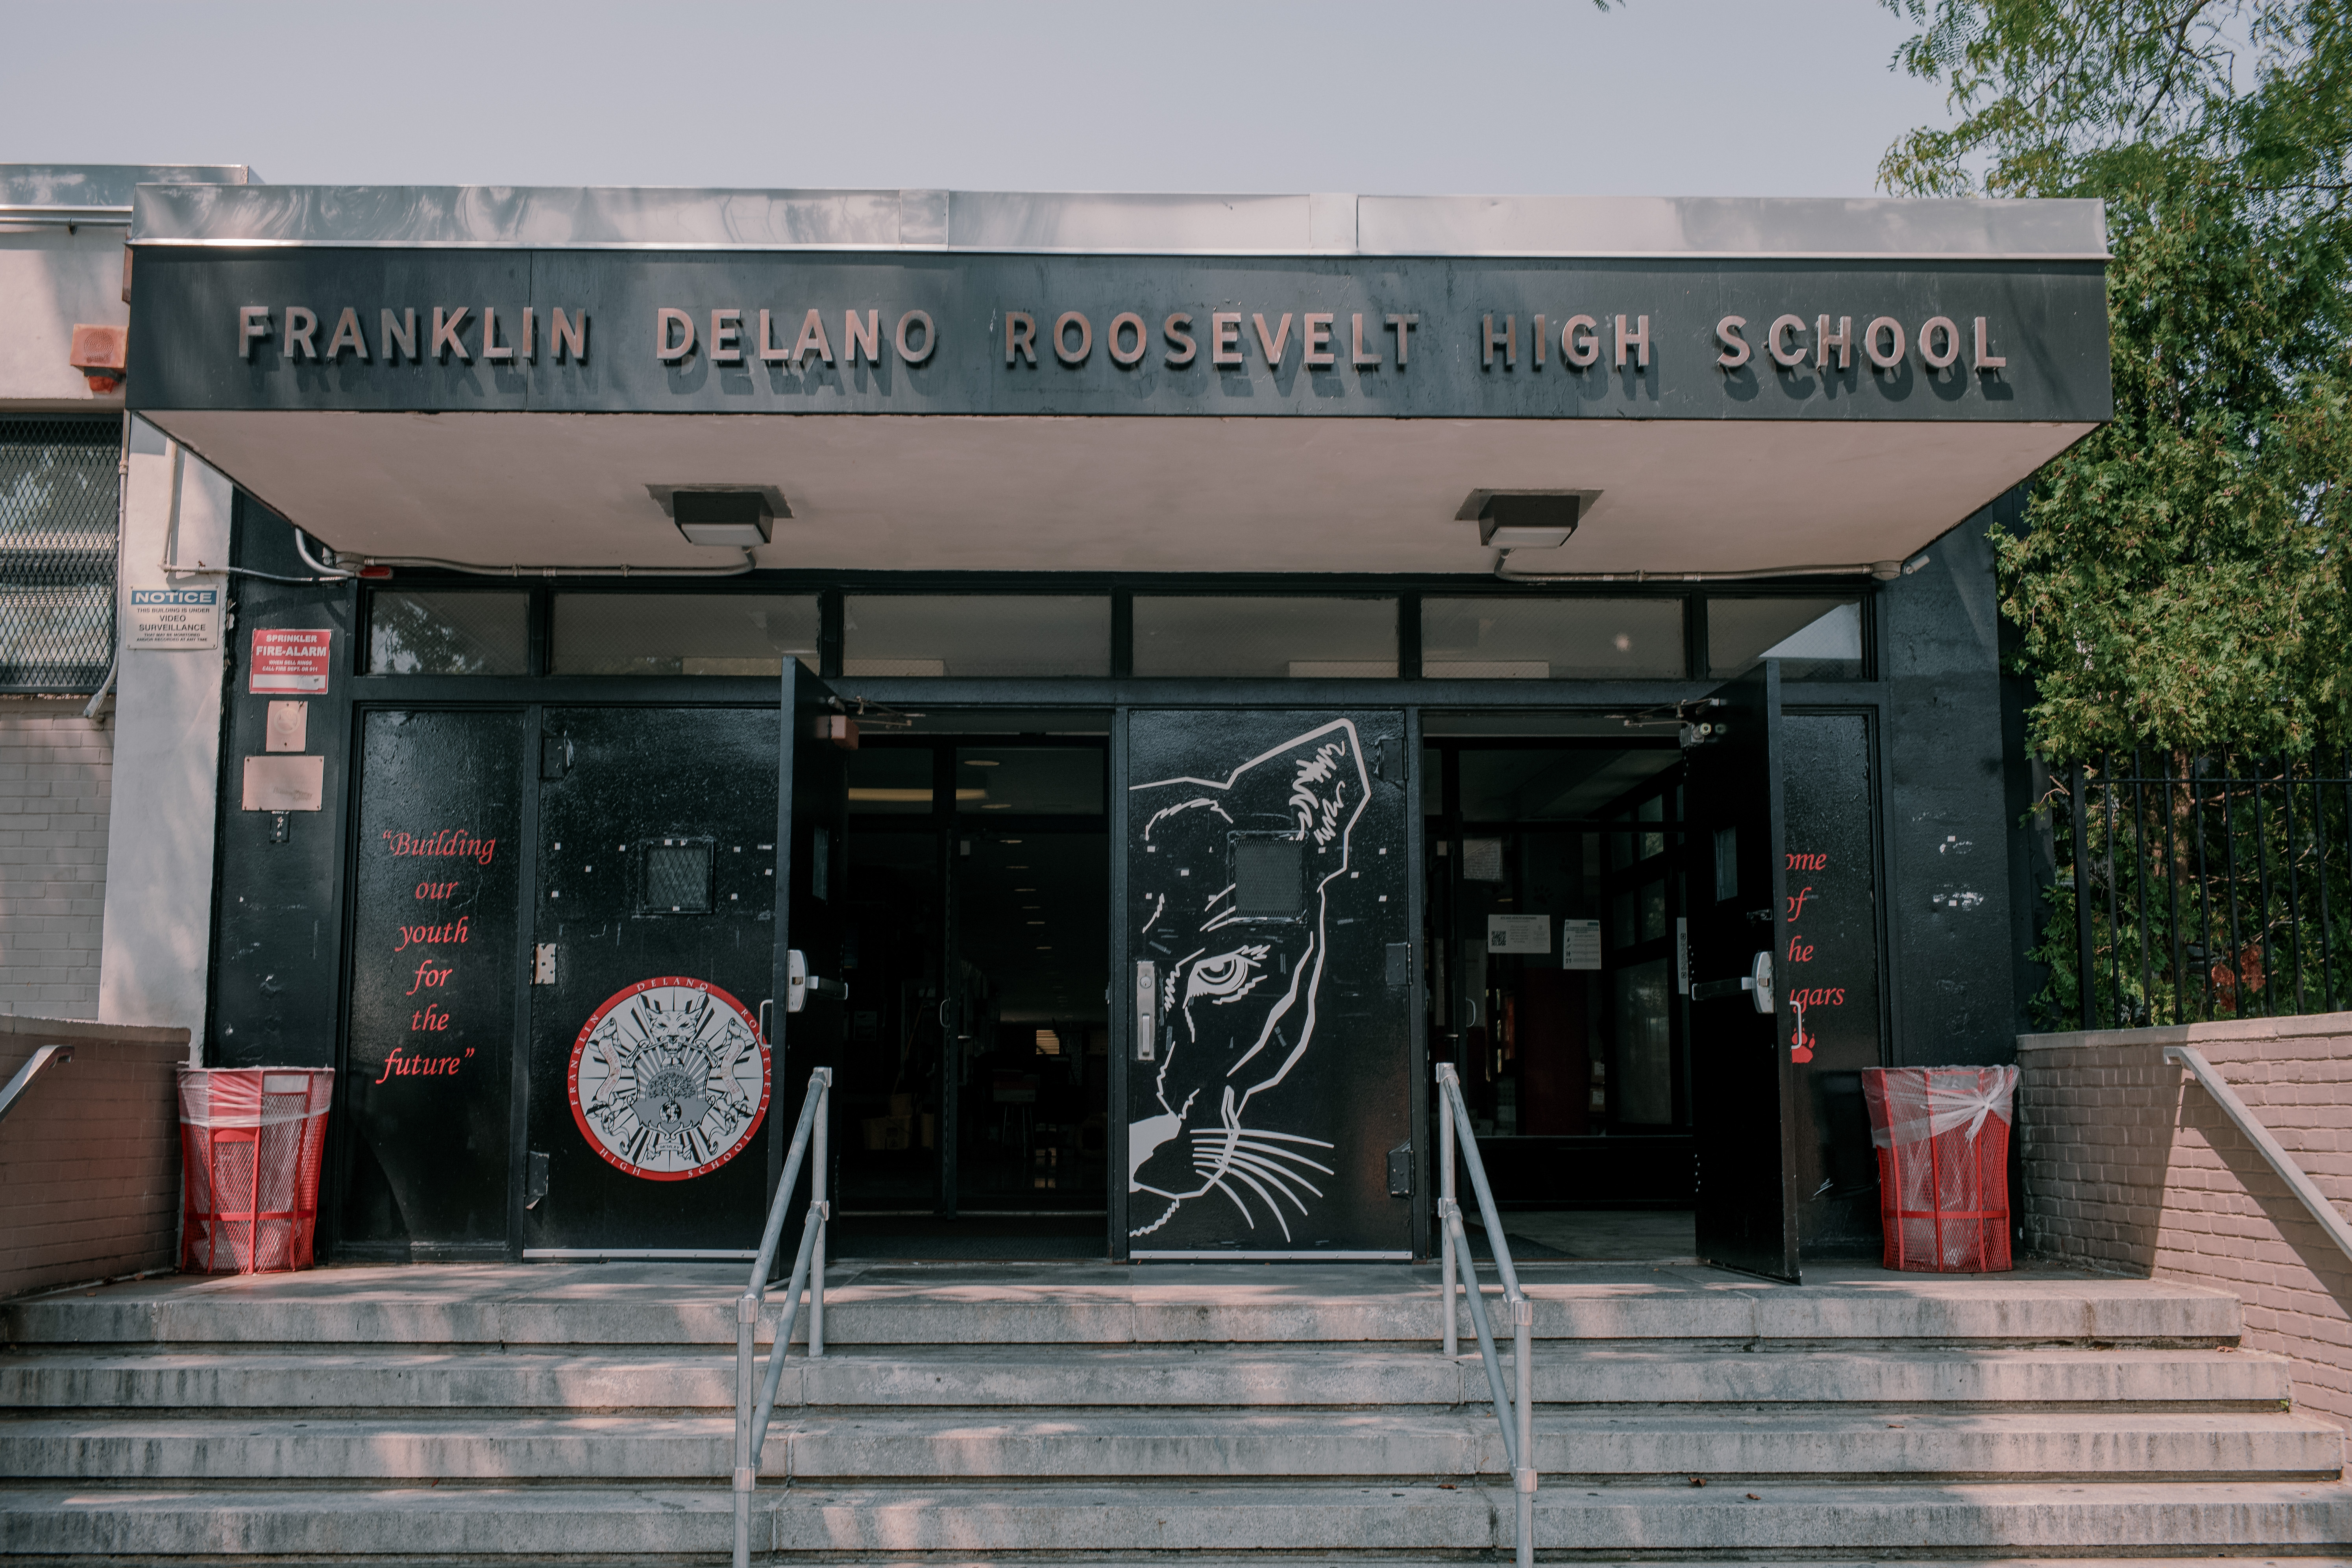 The exterior of FDR High School in Brooklyn, featuring its windows and air conditioning units